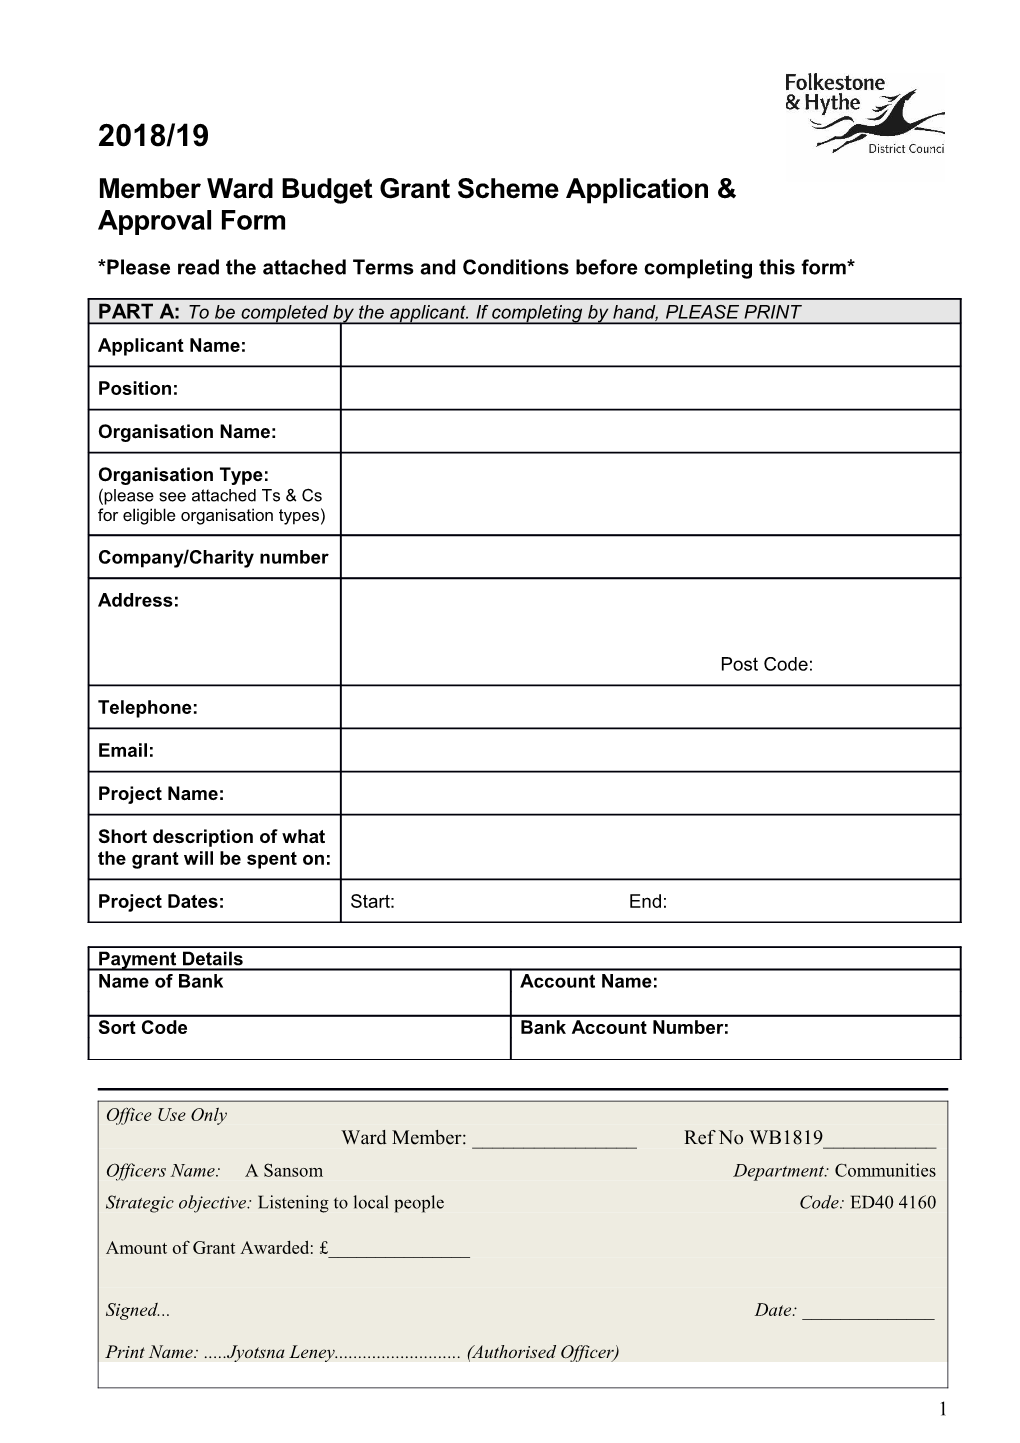 Shepway District Council Ward Budget Approval Form